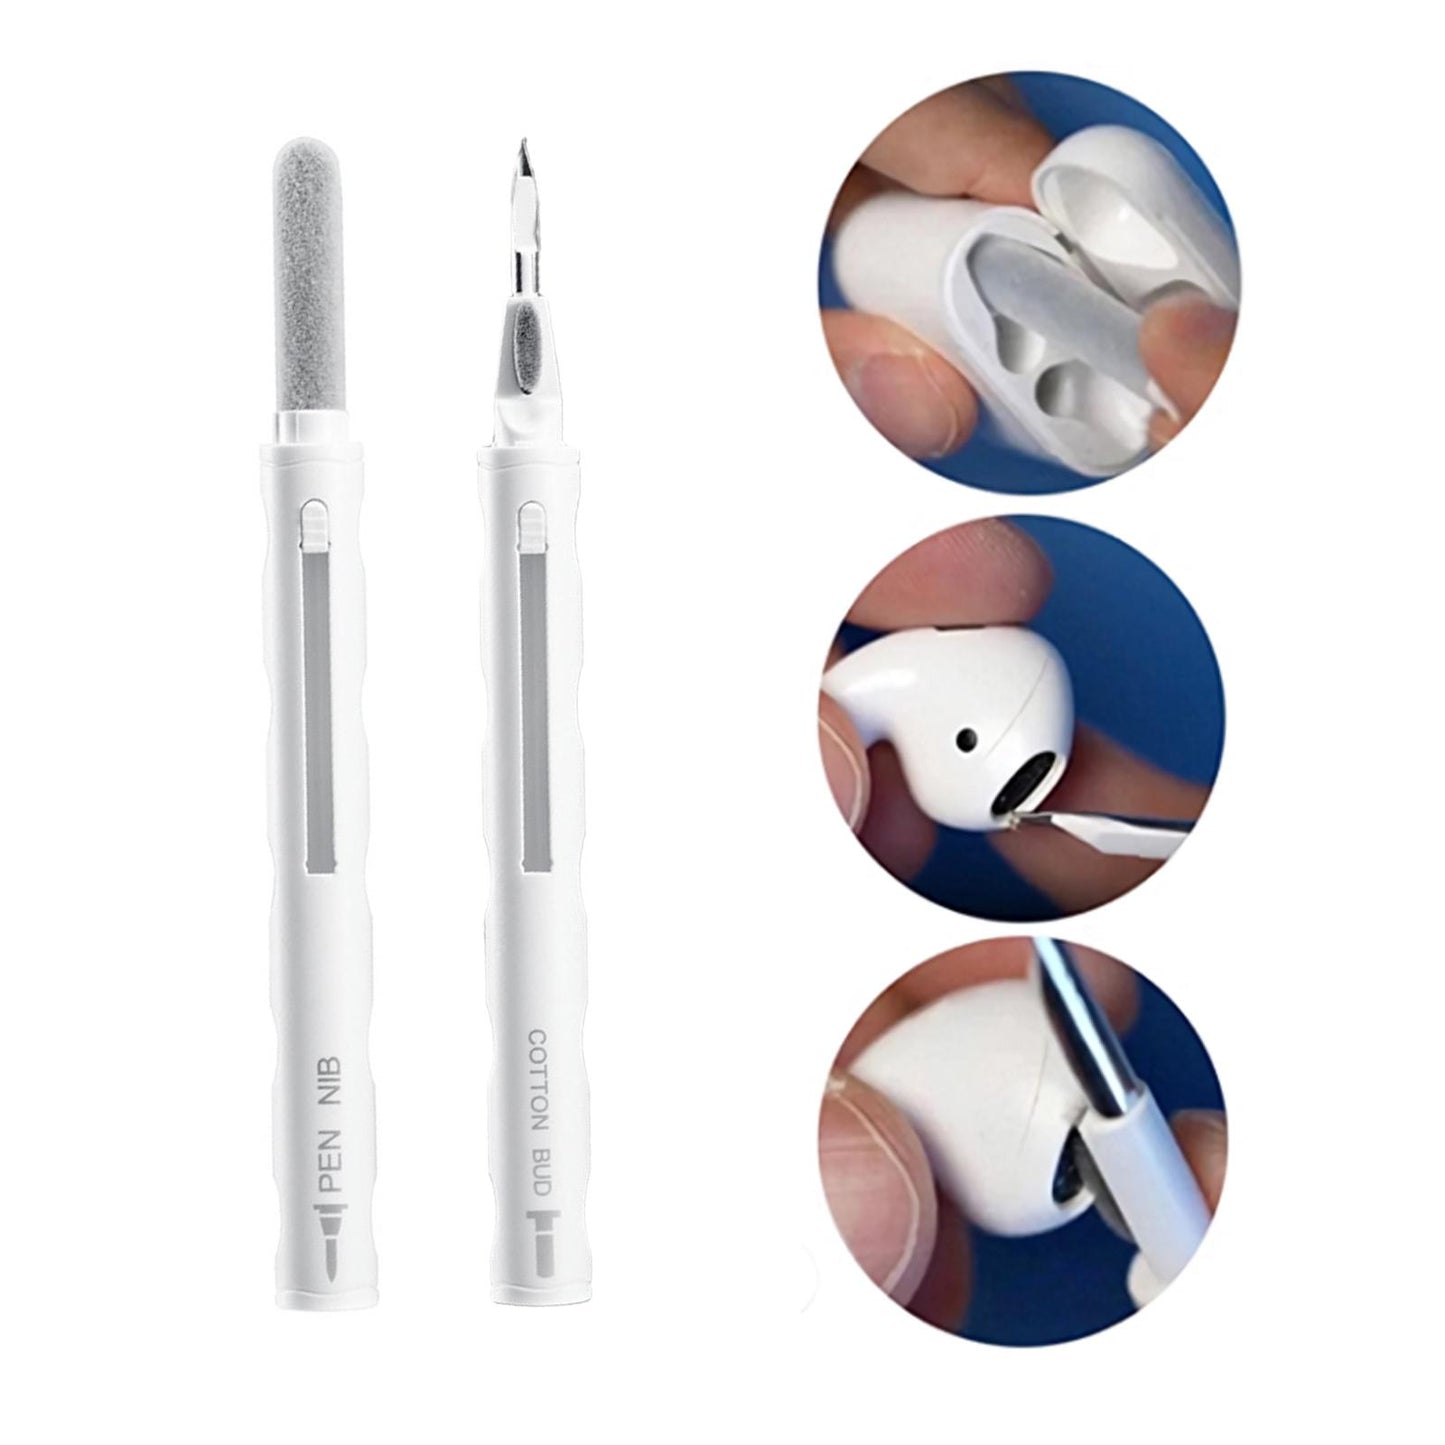 Apple AirPods & Multipurpose Electrical Cleaning Kit and Detailer